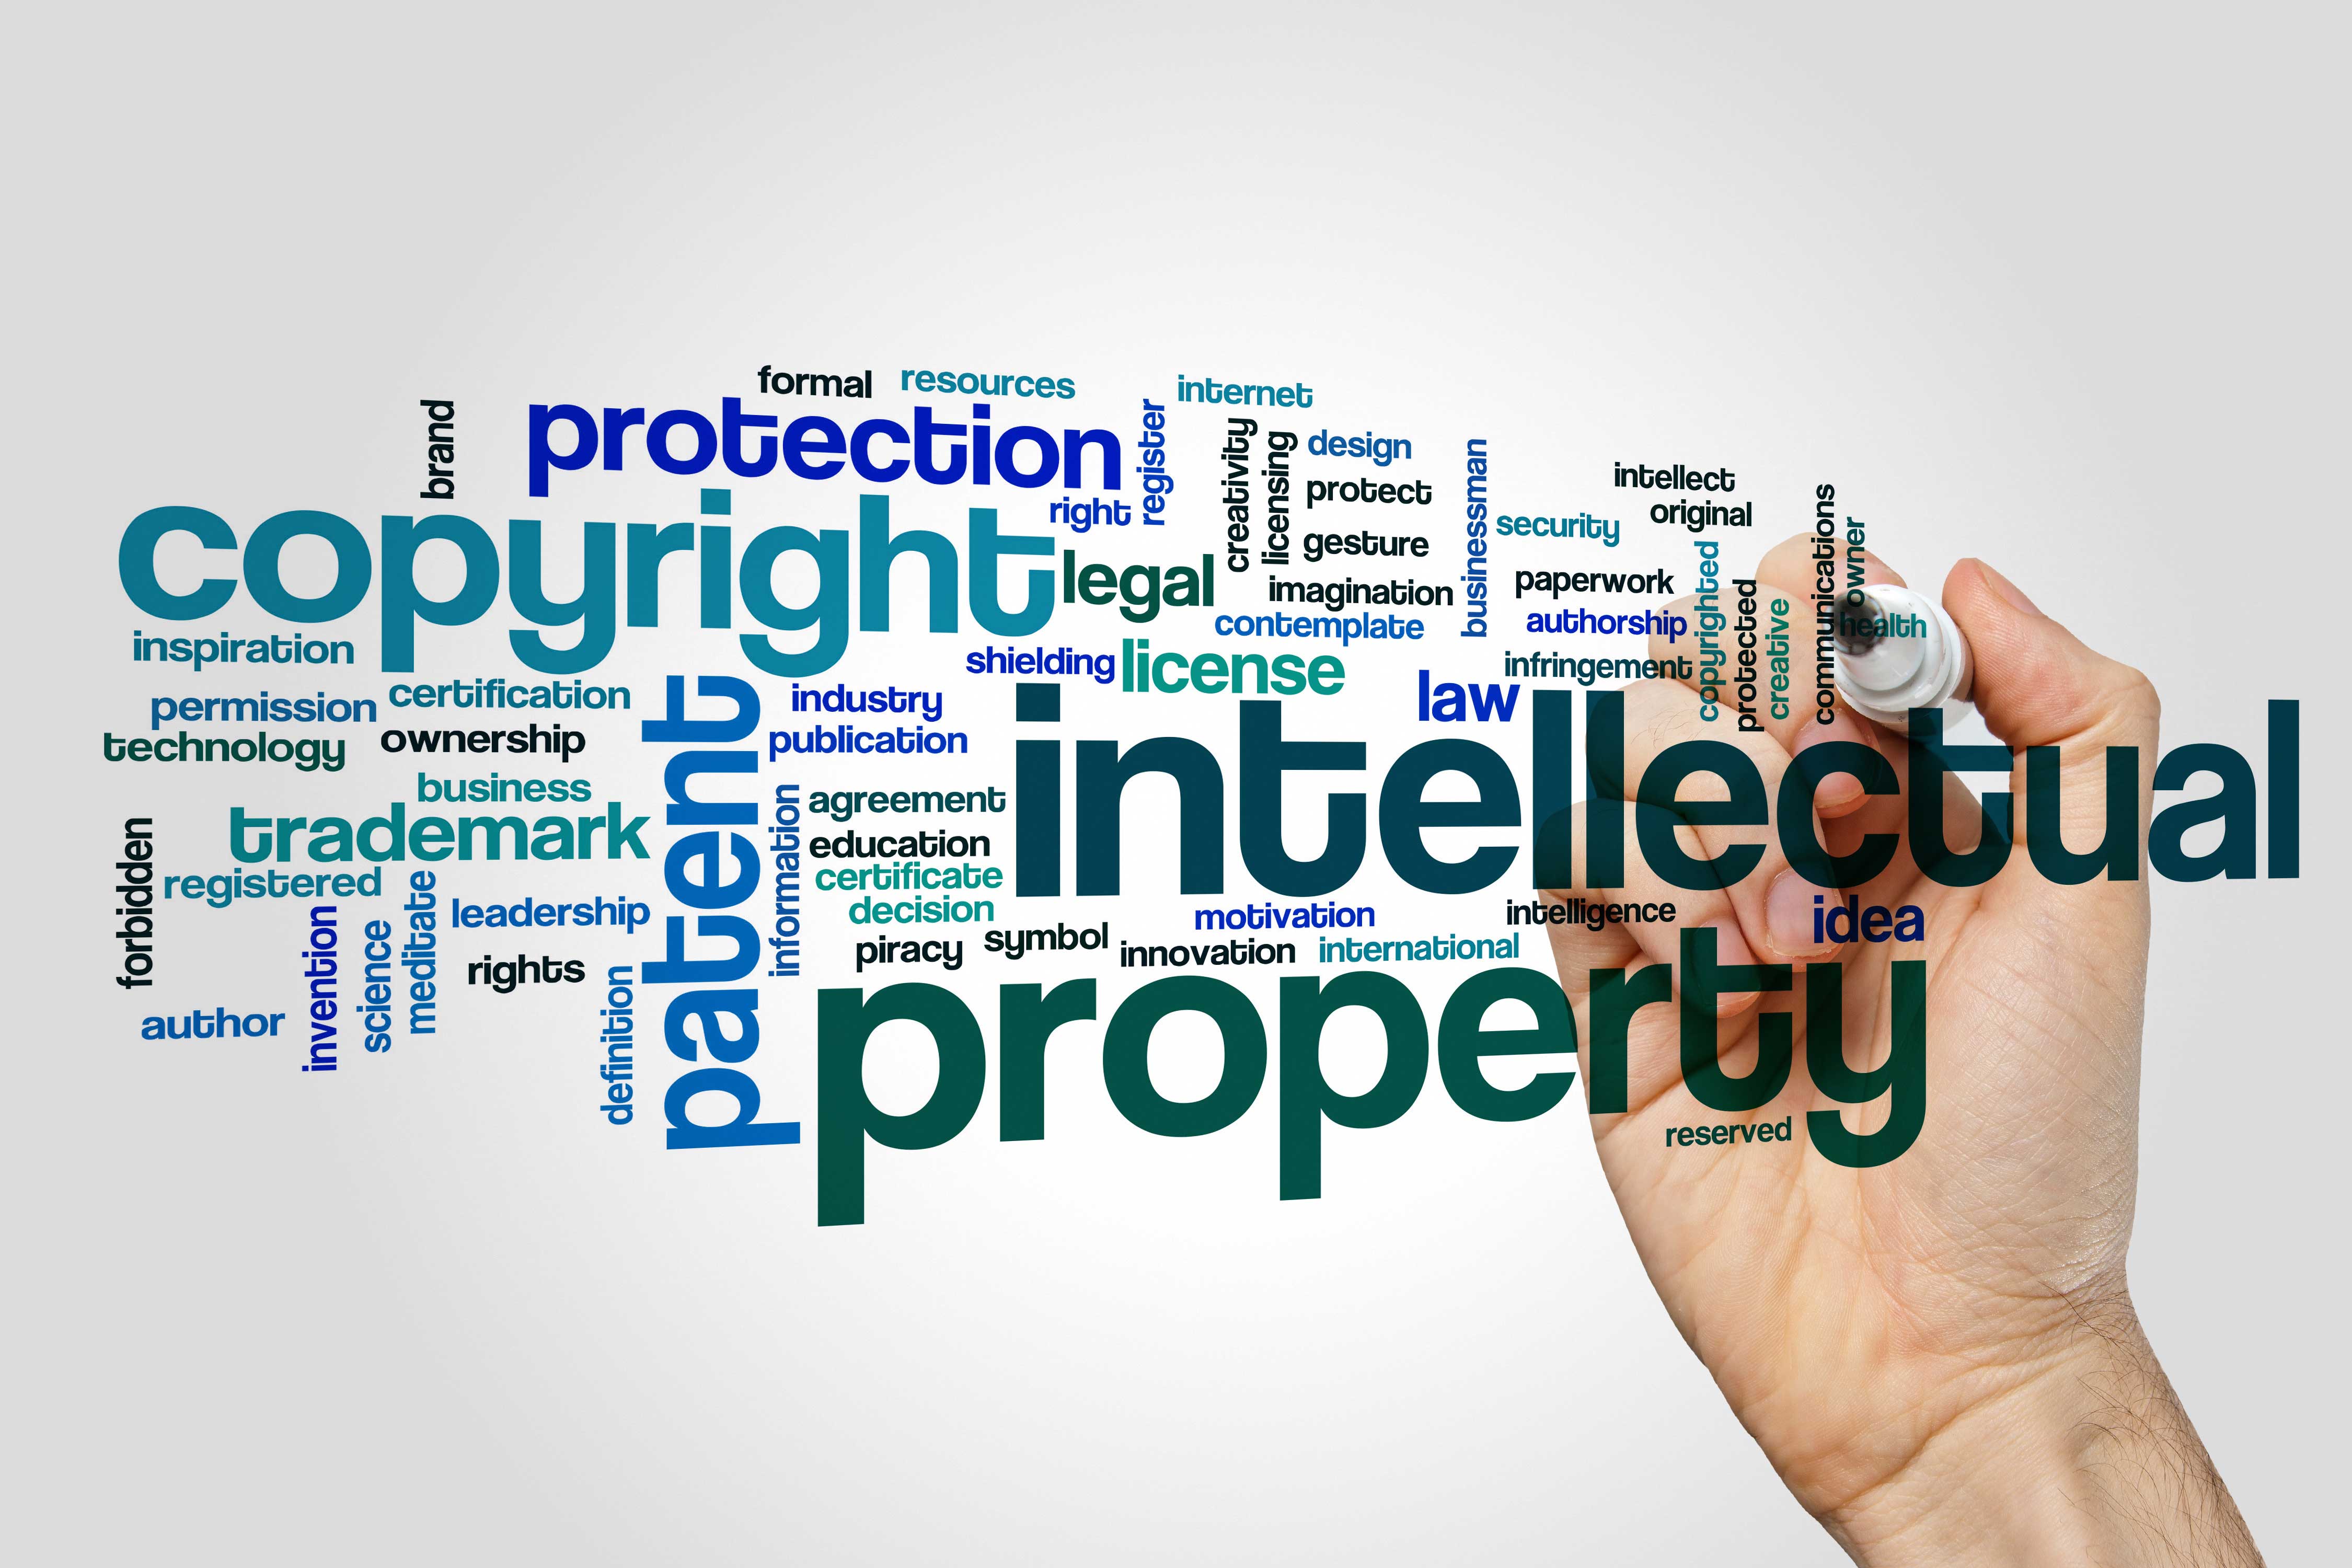 intellectual property in a business plan